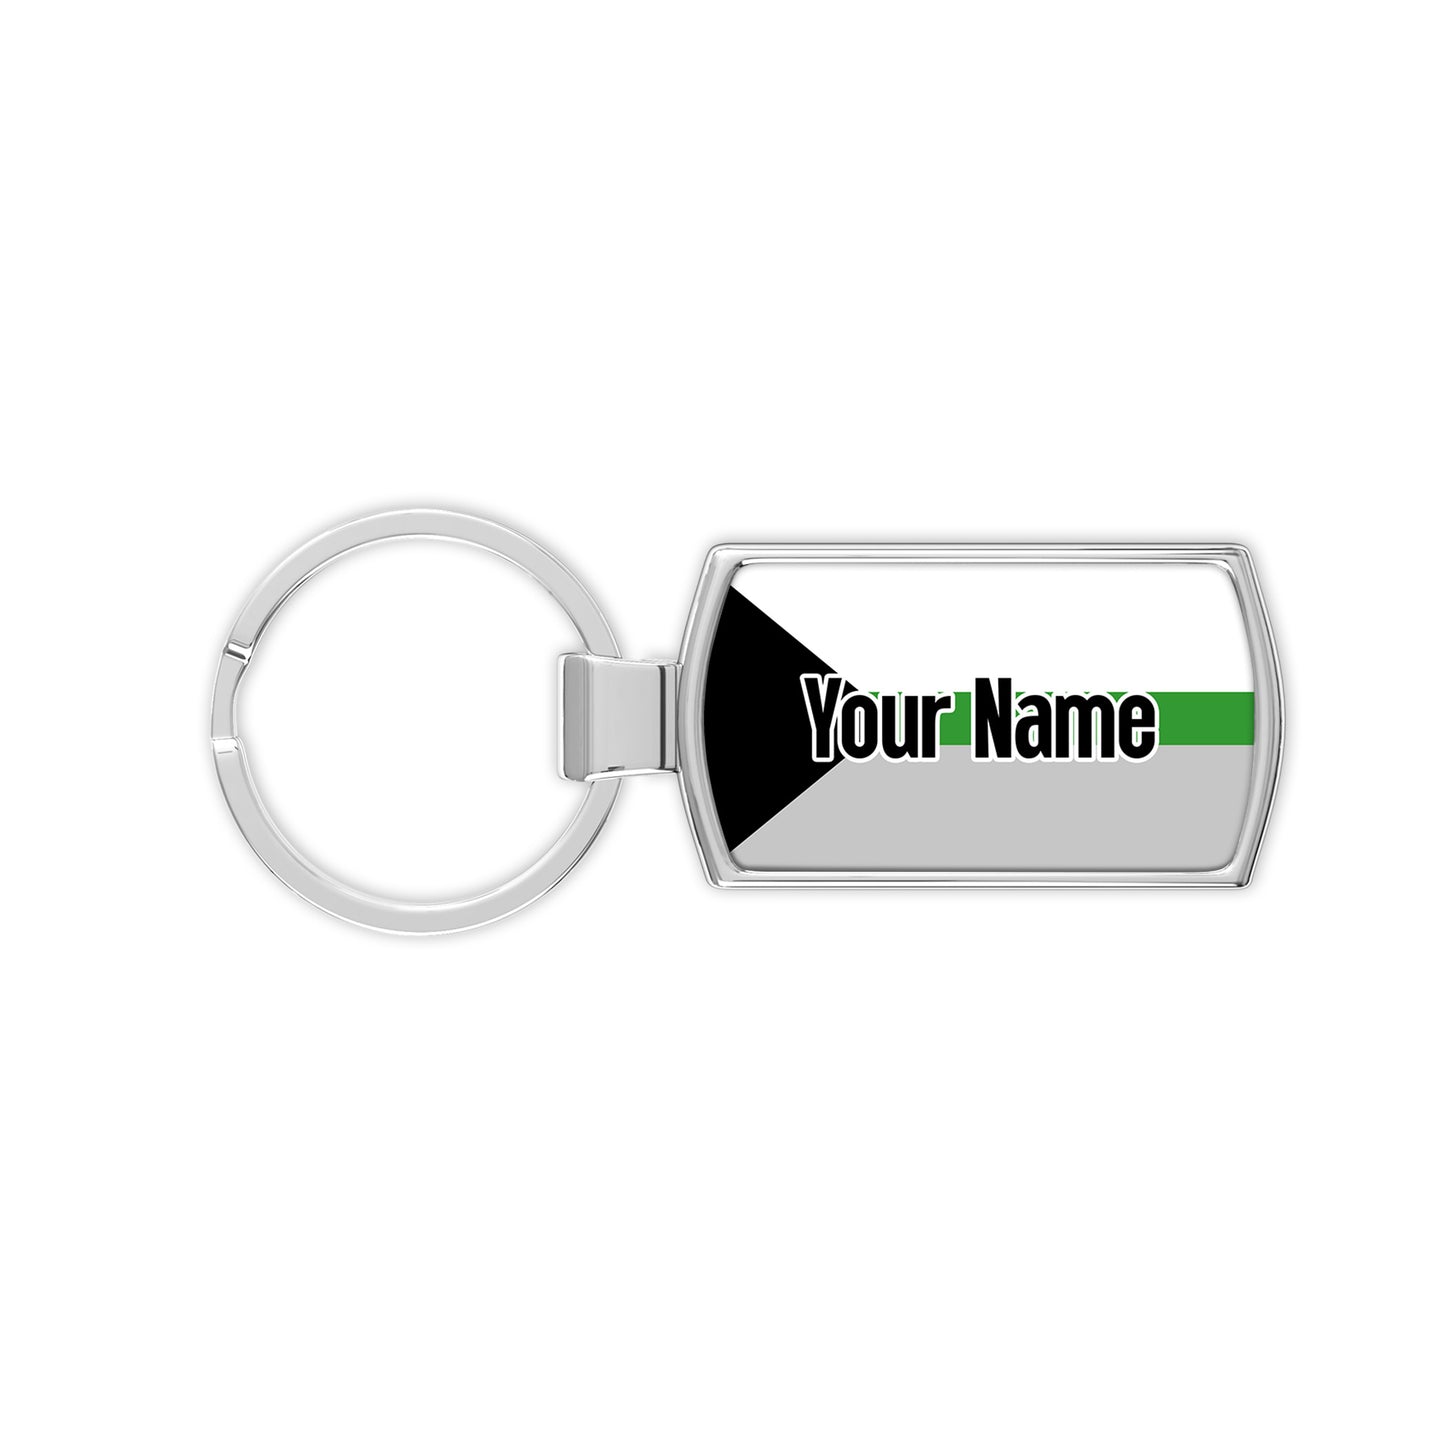 Demiromantic pride flag metal keyring that comes personalised with your name printed on it